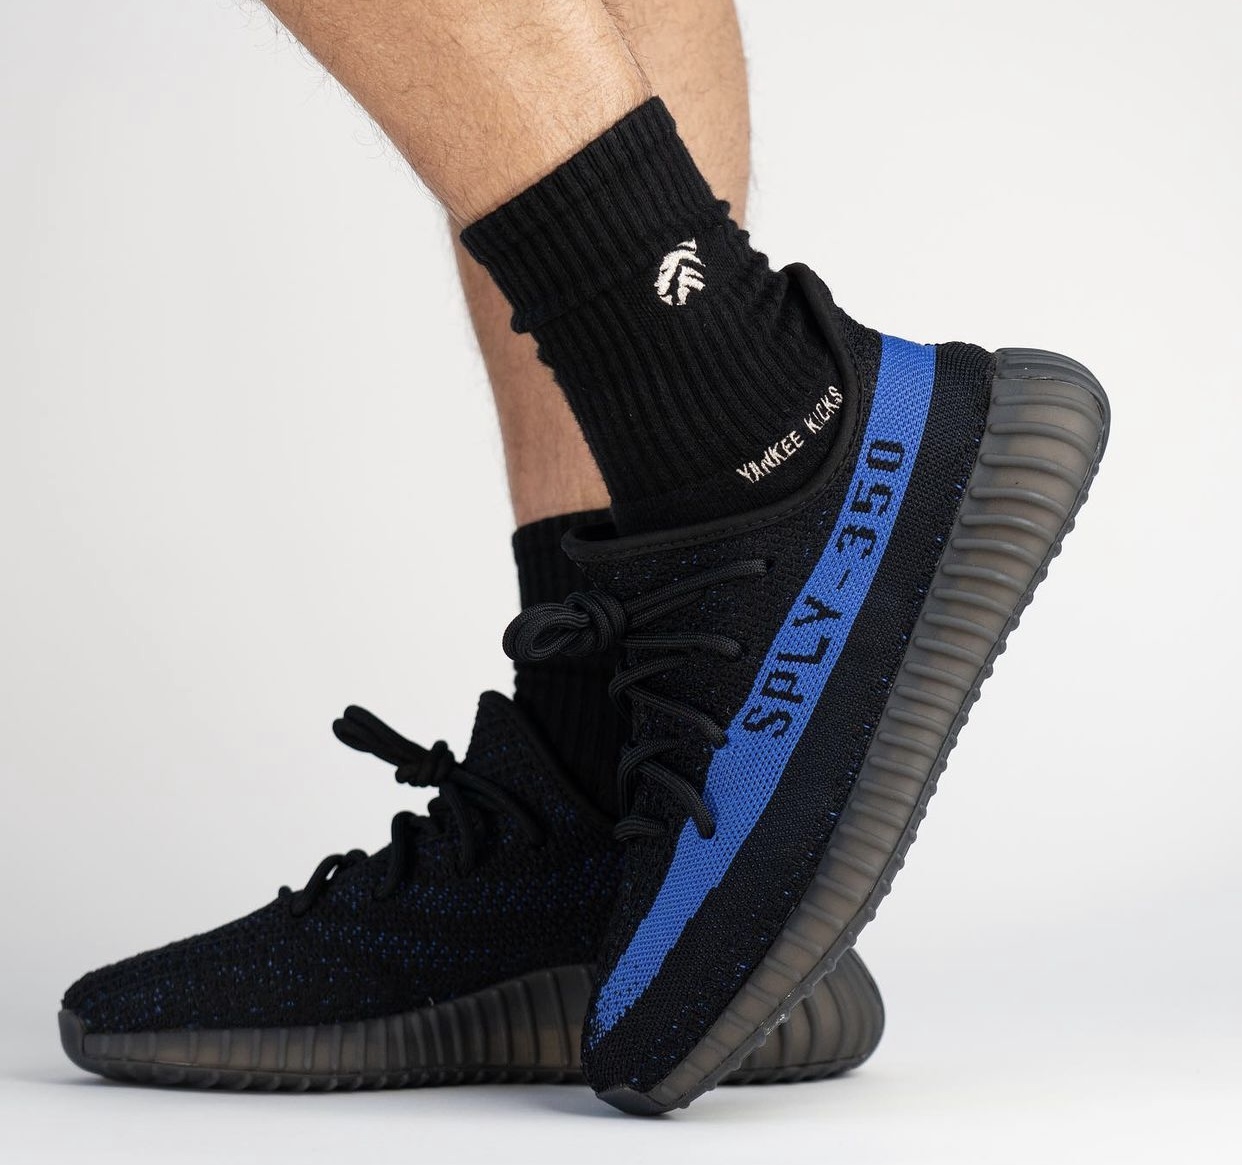 adidas Yeezy Boost 350 V2 Dazzling Blue GY7164 Release Date On-Feet